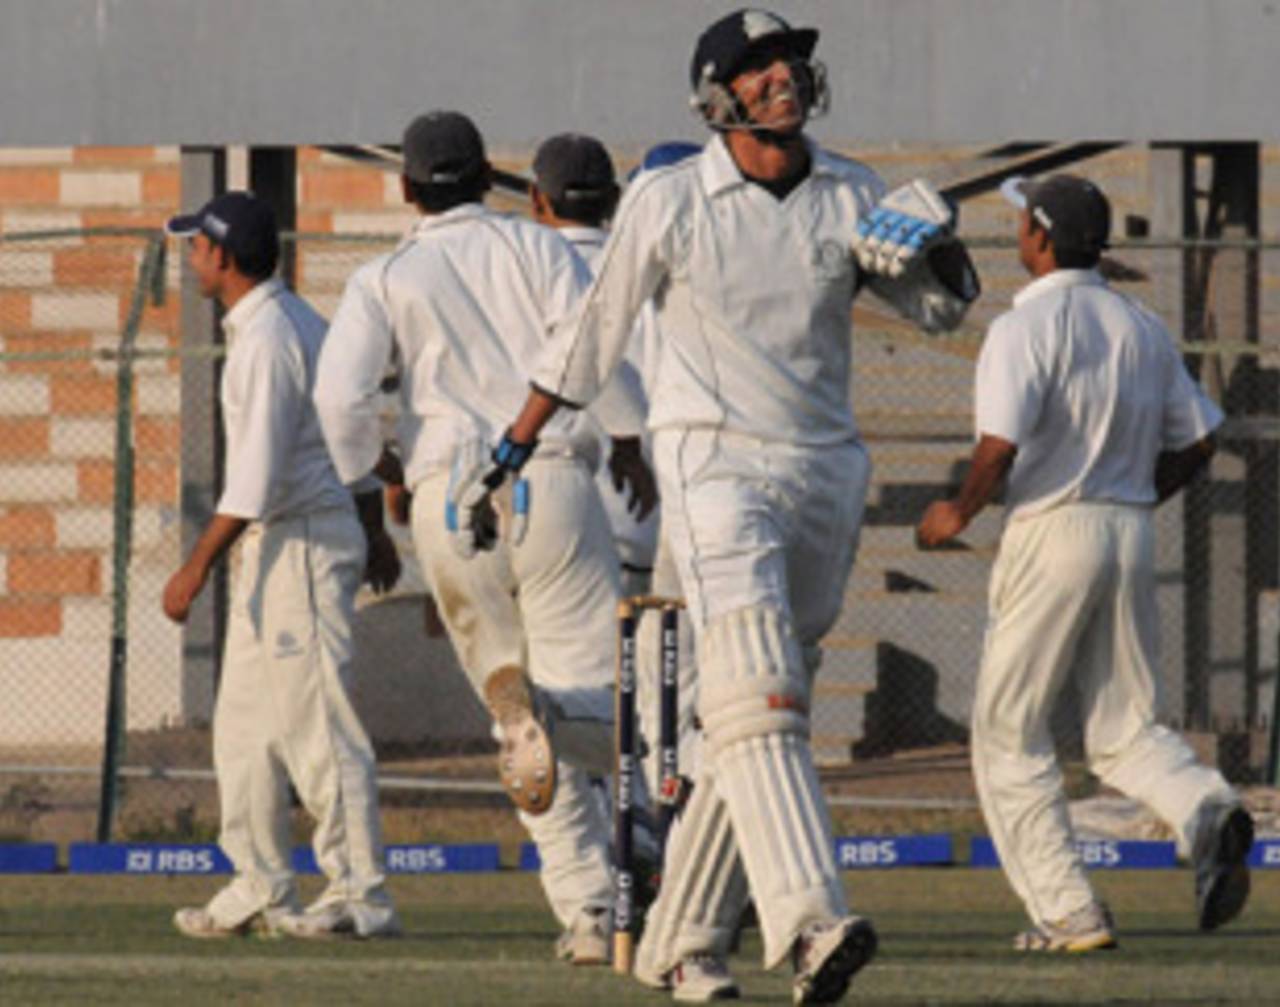 Younis Khan cannot hide his disappointment after getting out for 7, Habib Bank Limited v Karachi Blues, Quaid-e-Azam Trophy, final, Karachi, 1st day, December 21, 2009